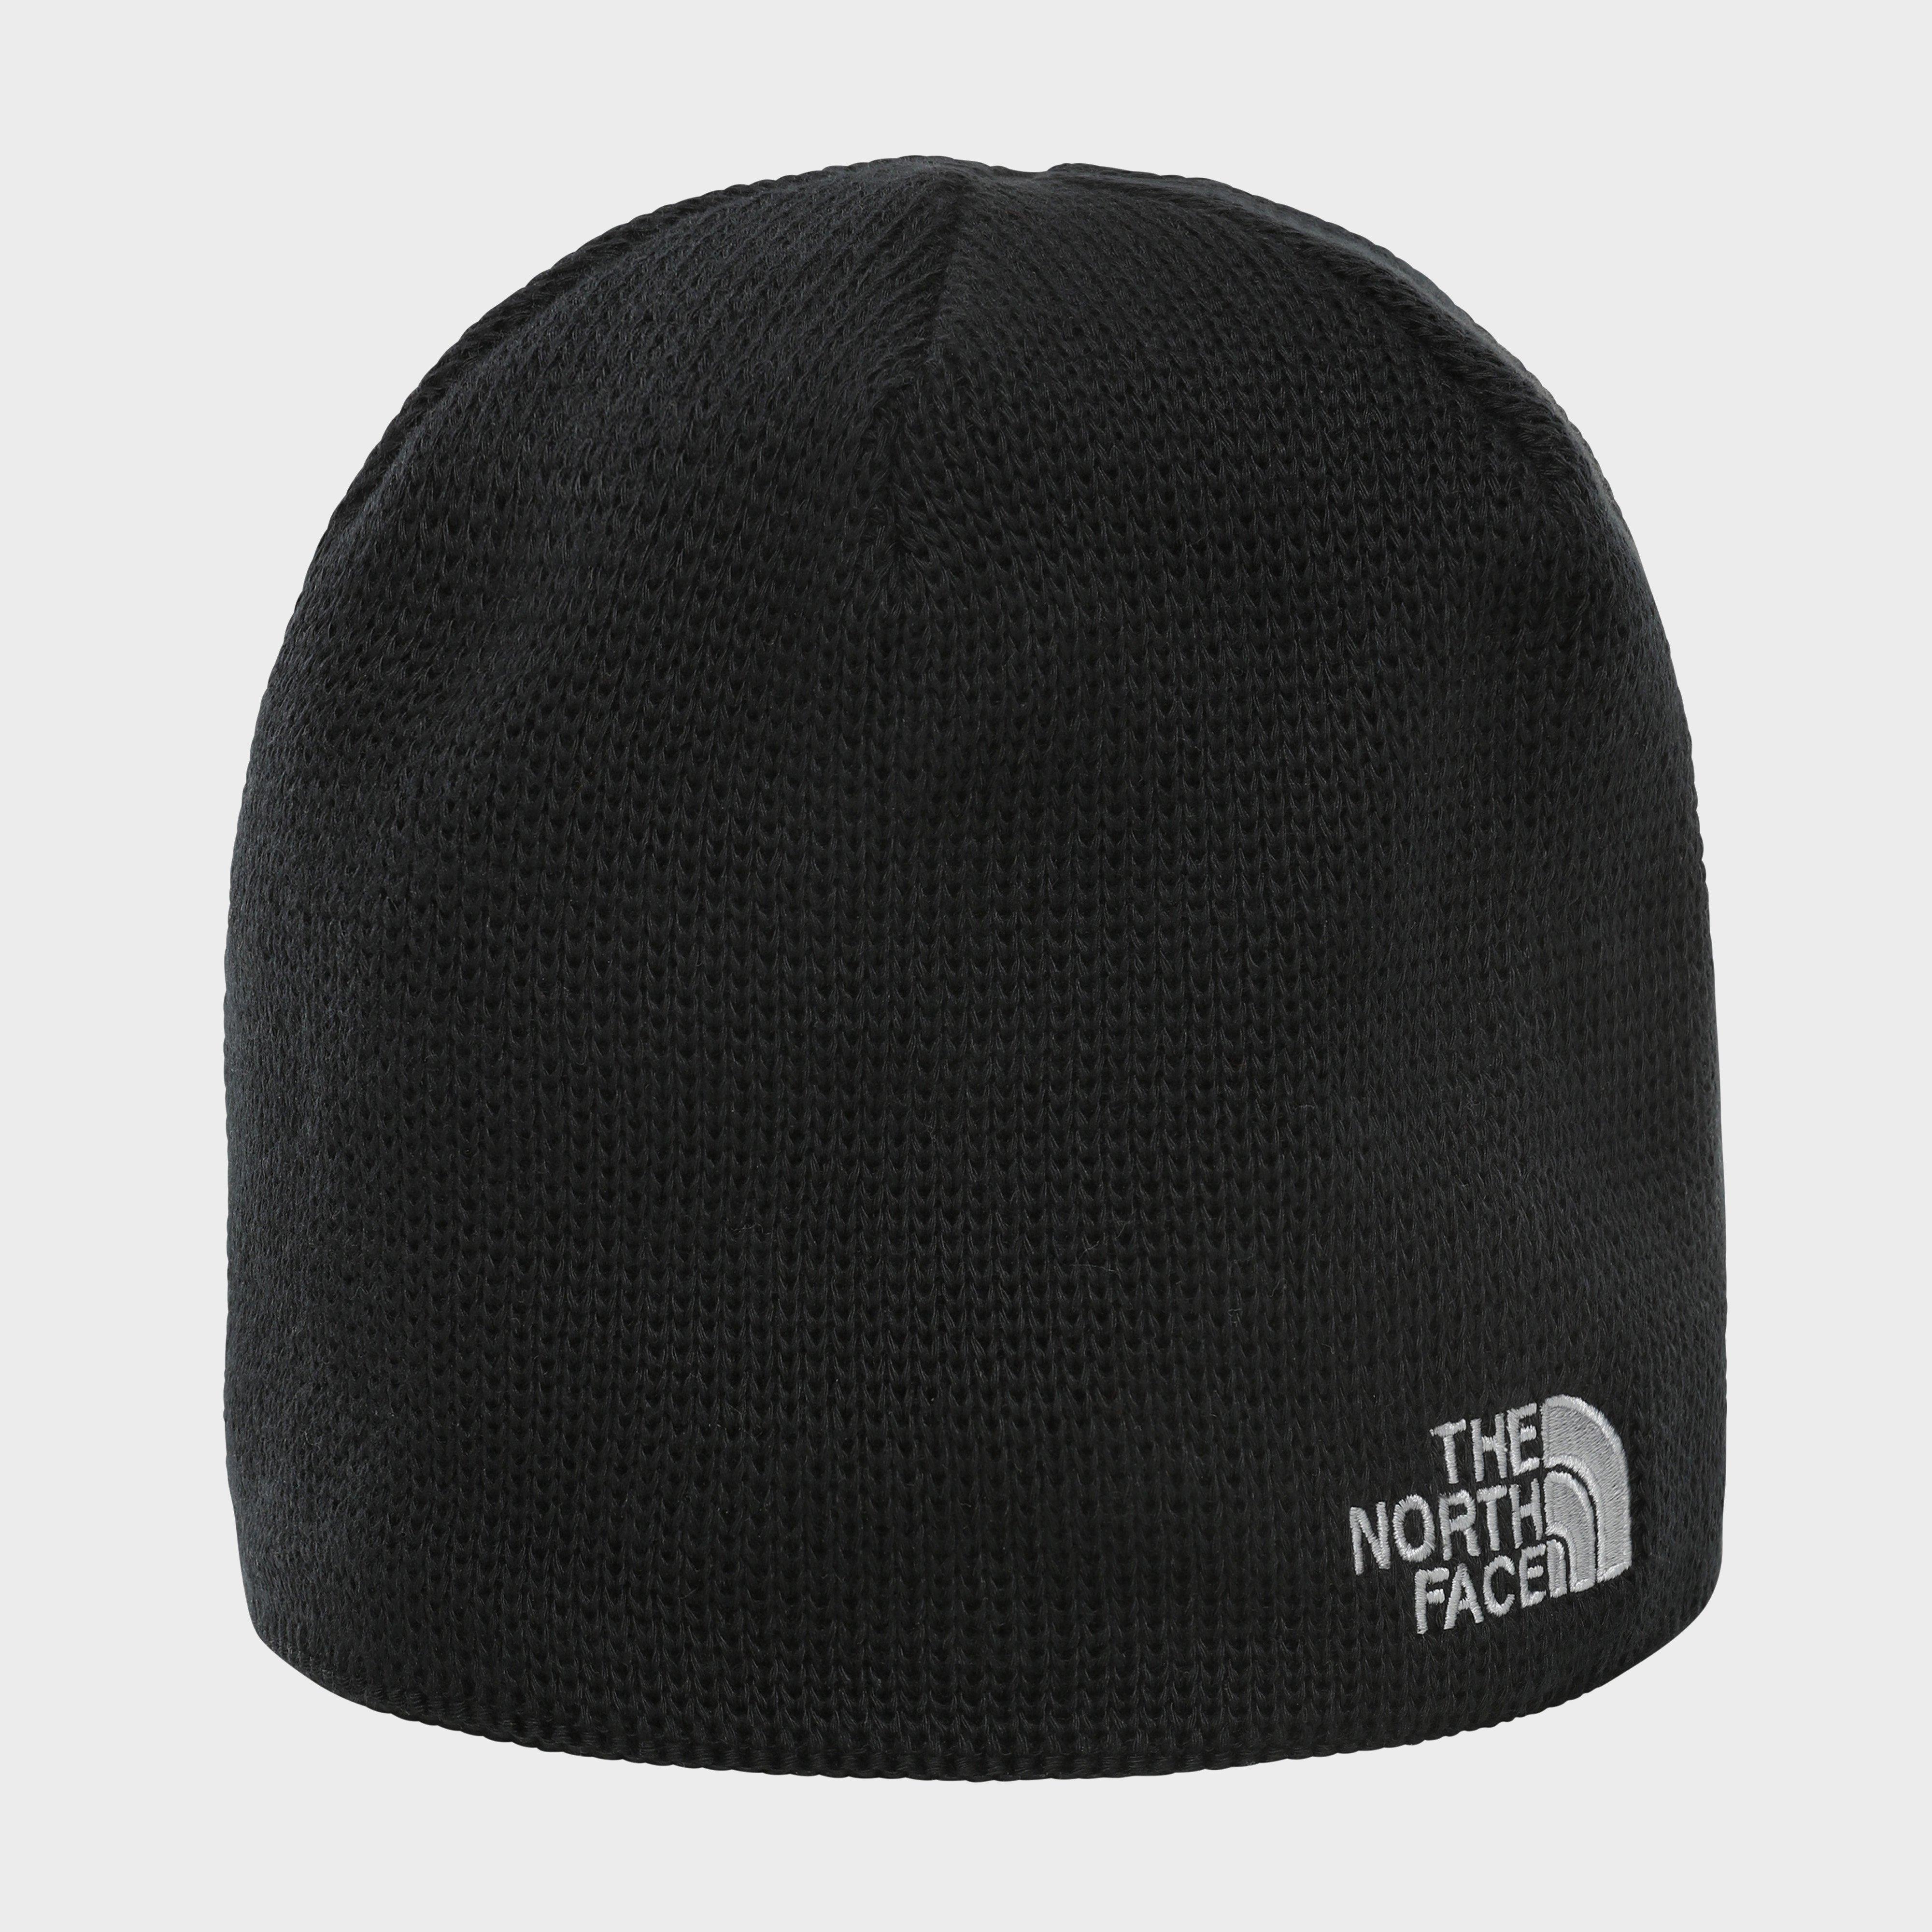 The North Face Mens Bones Recycled Beanie - Black  Black